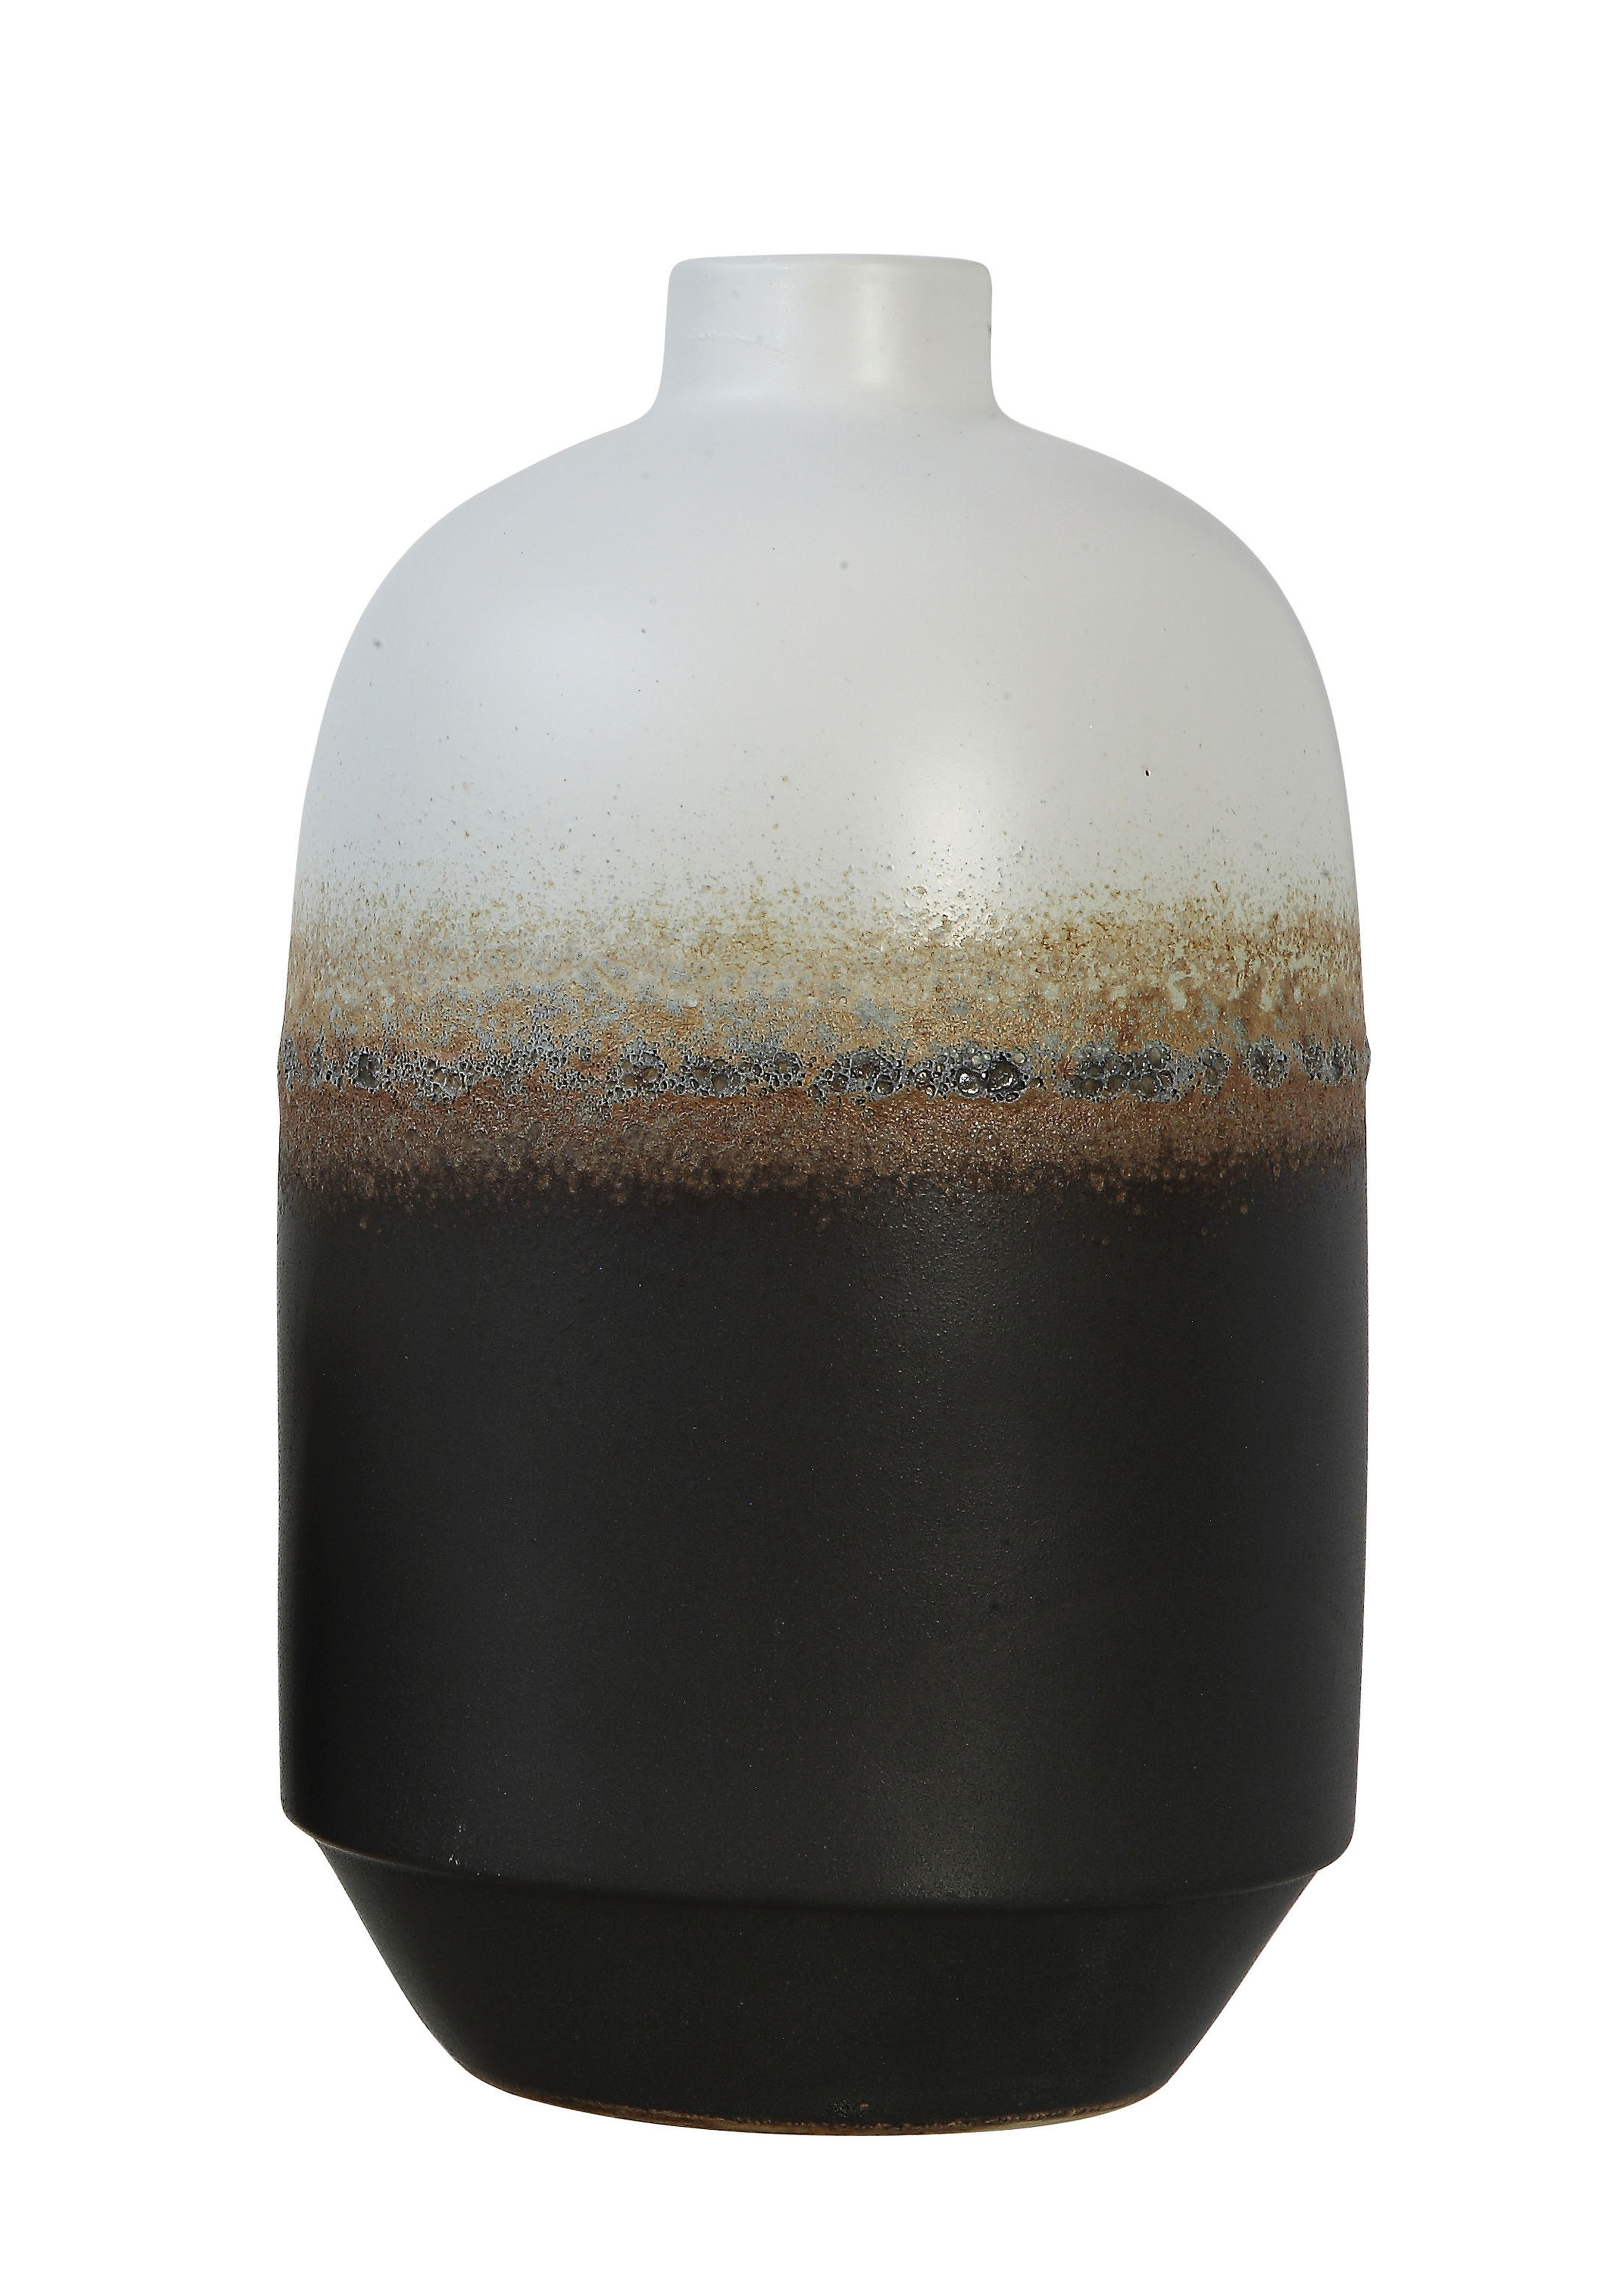 Large Black & White Ceramic Vase with Brown Reactive Glaze Accent - Moss & Wilder